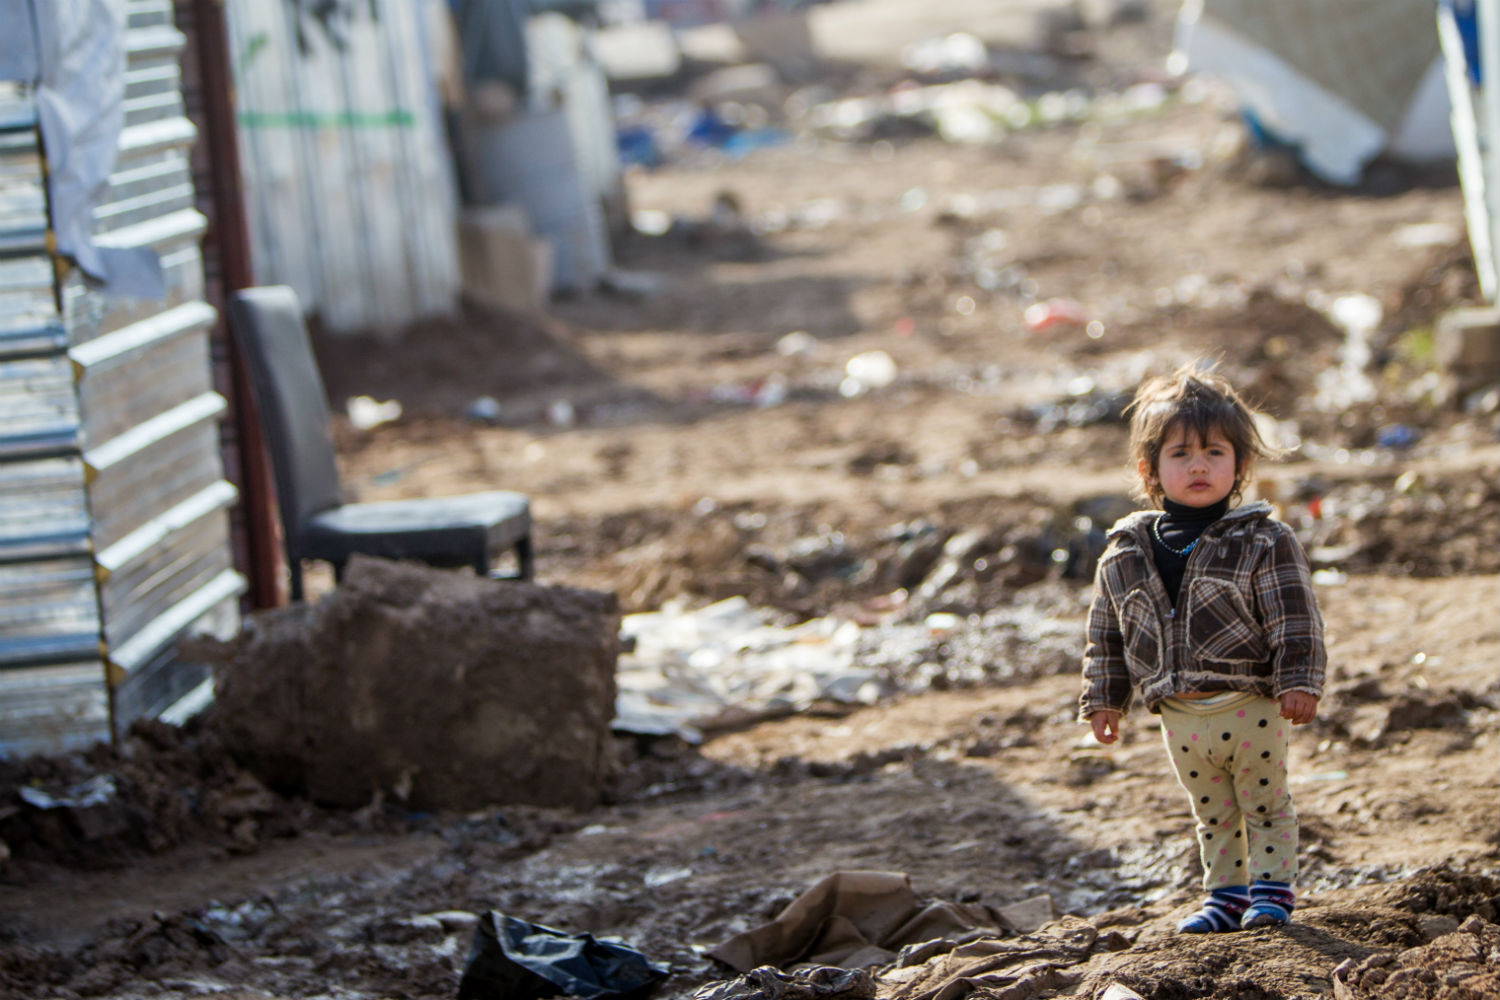 Hakim's little sister Amira walks shoeless among the dirt and frozen puddles to the outside toilet. © Unicef/2014//Schernbrucker